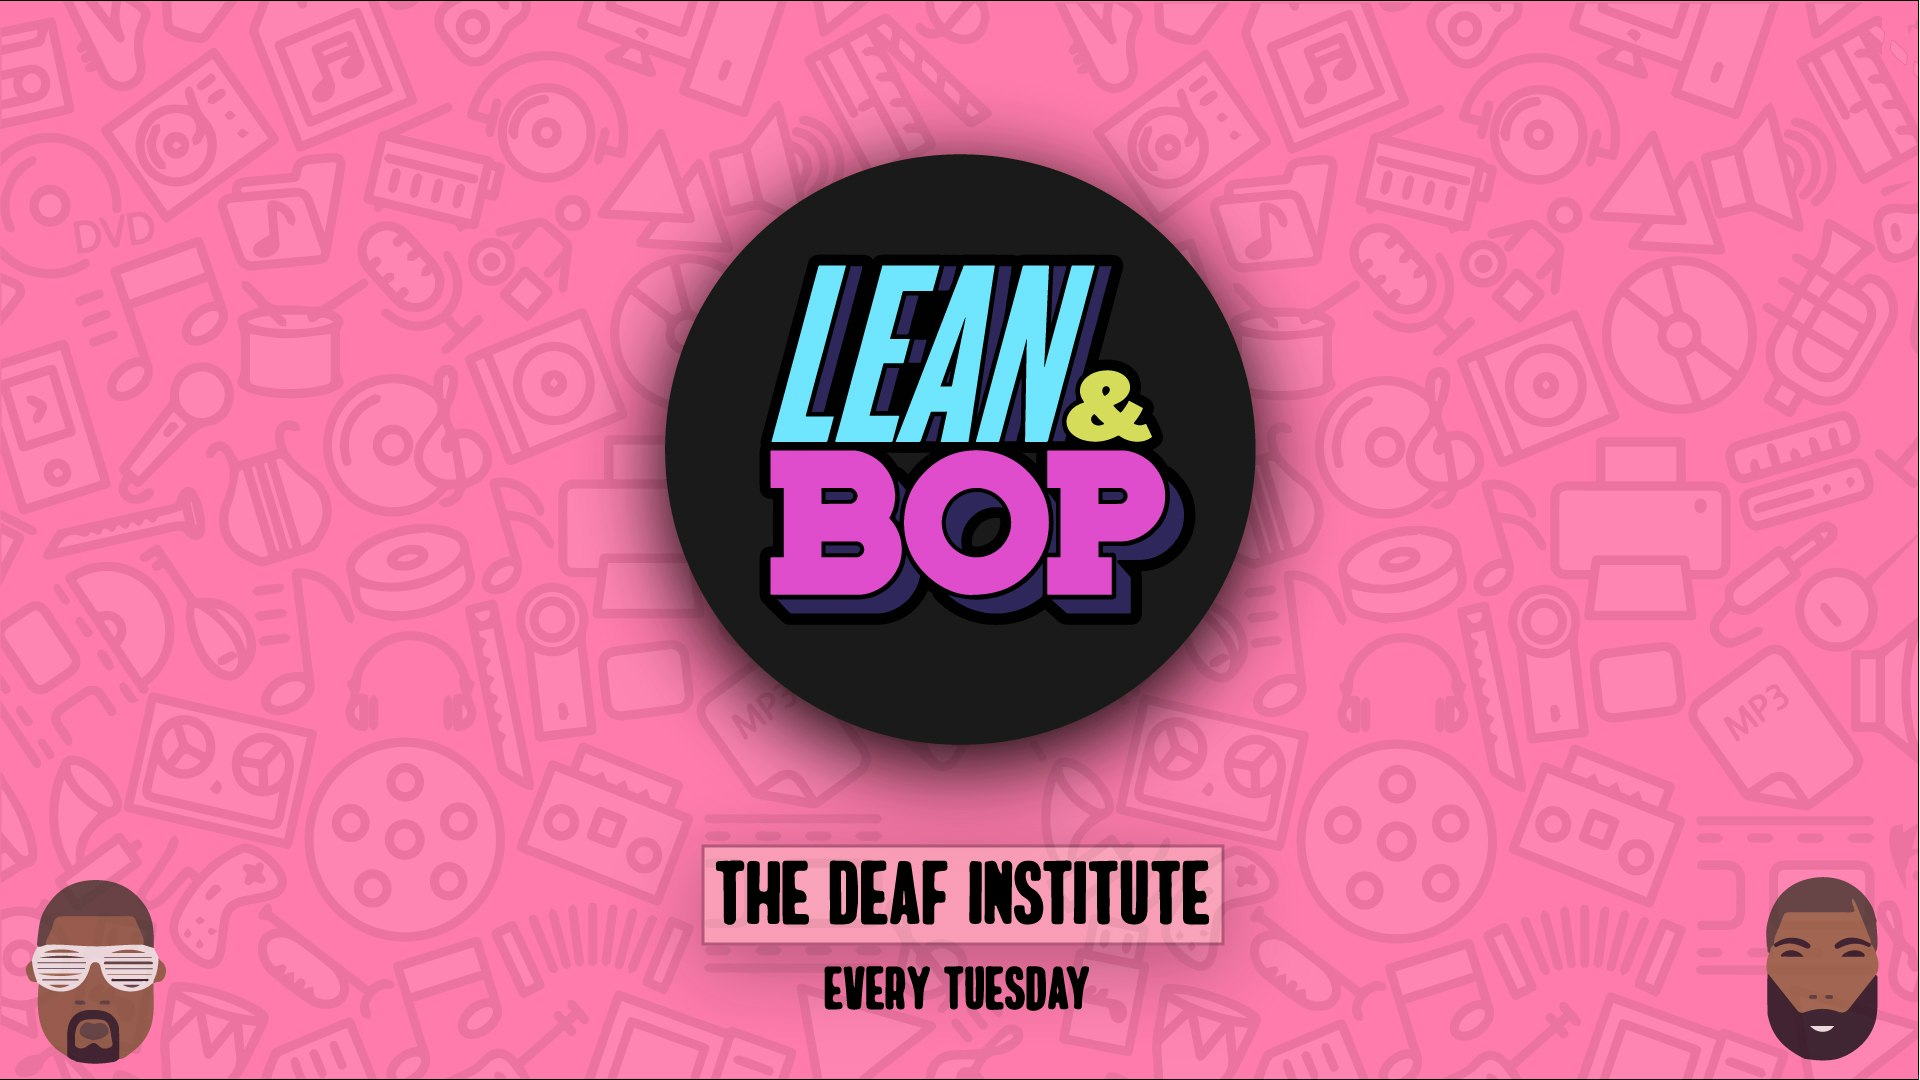 Lean & Bop – Freshers opening party